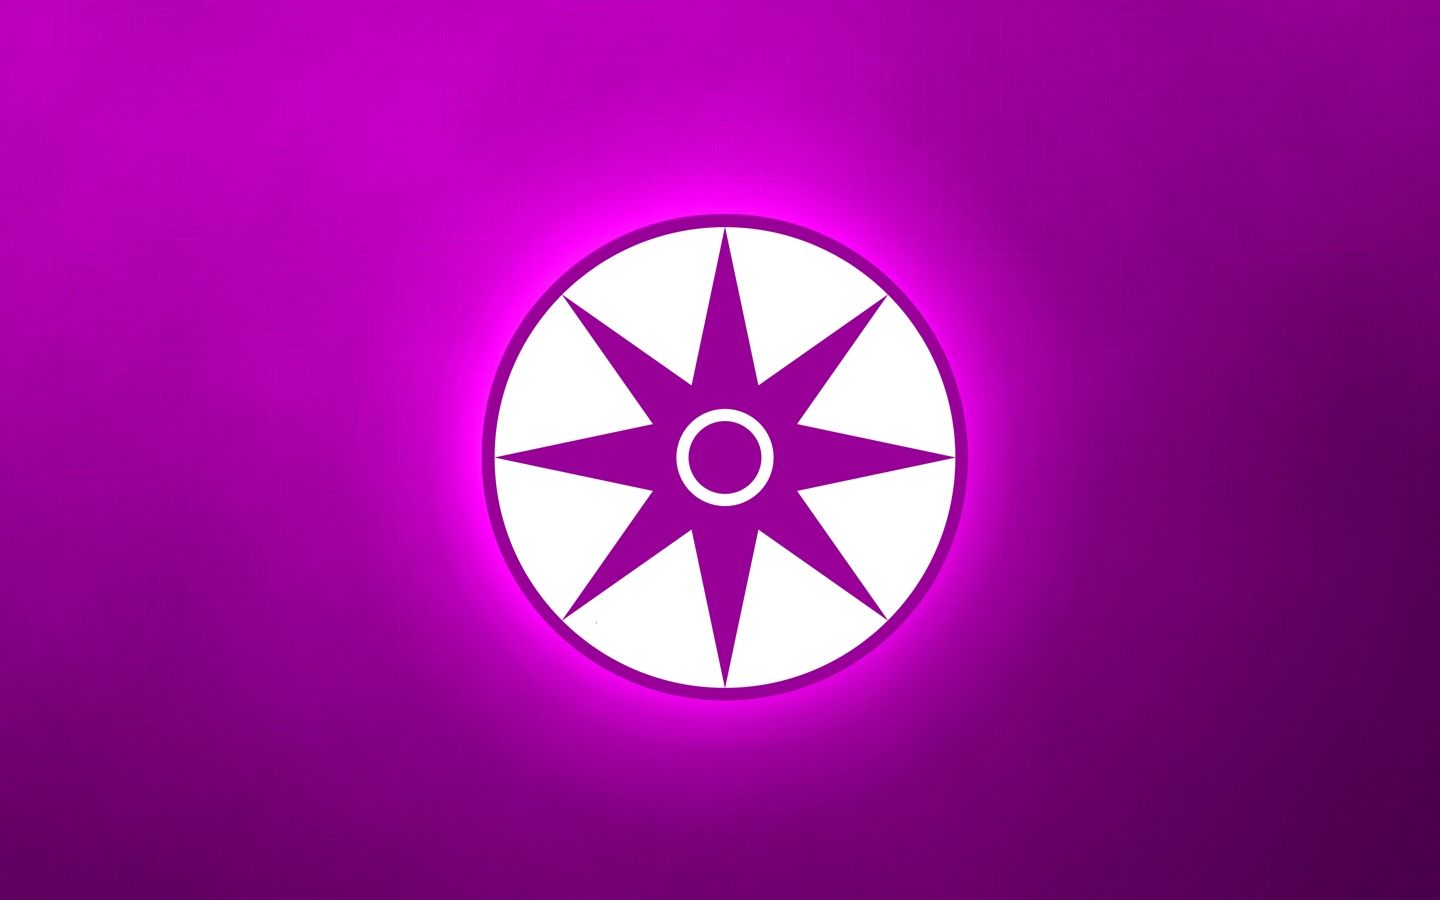 Star Sapphire Corps Wallpaper and Background Imagex900